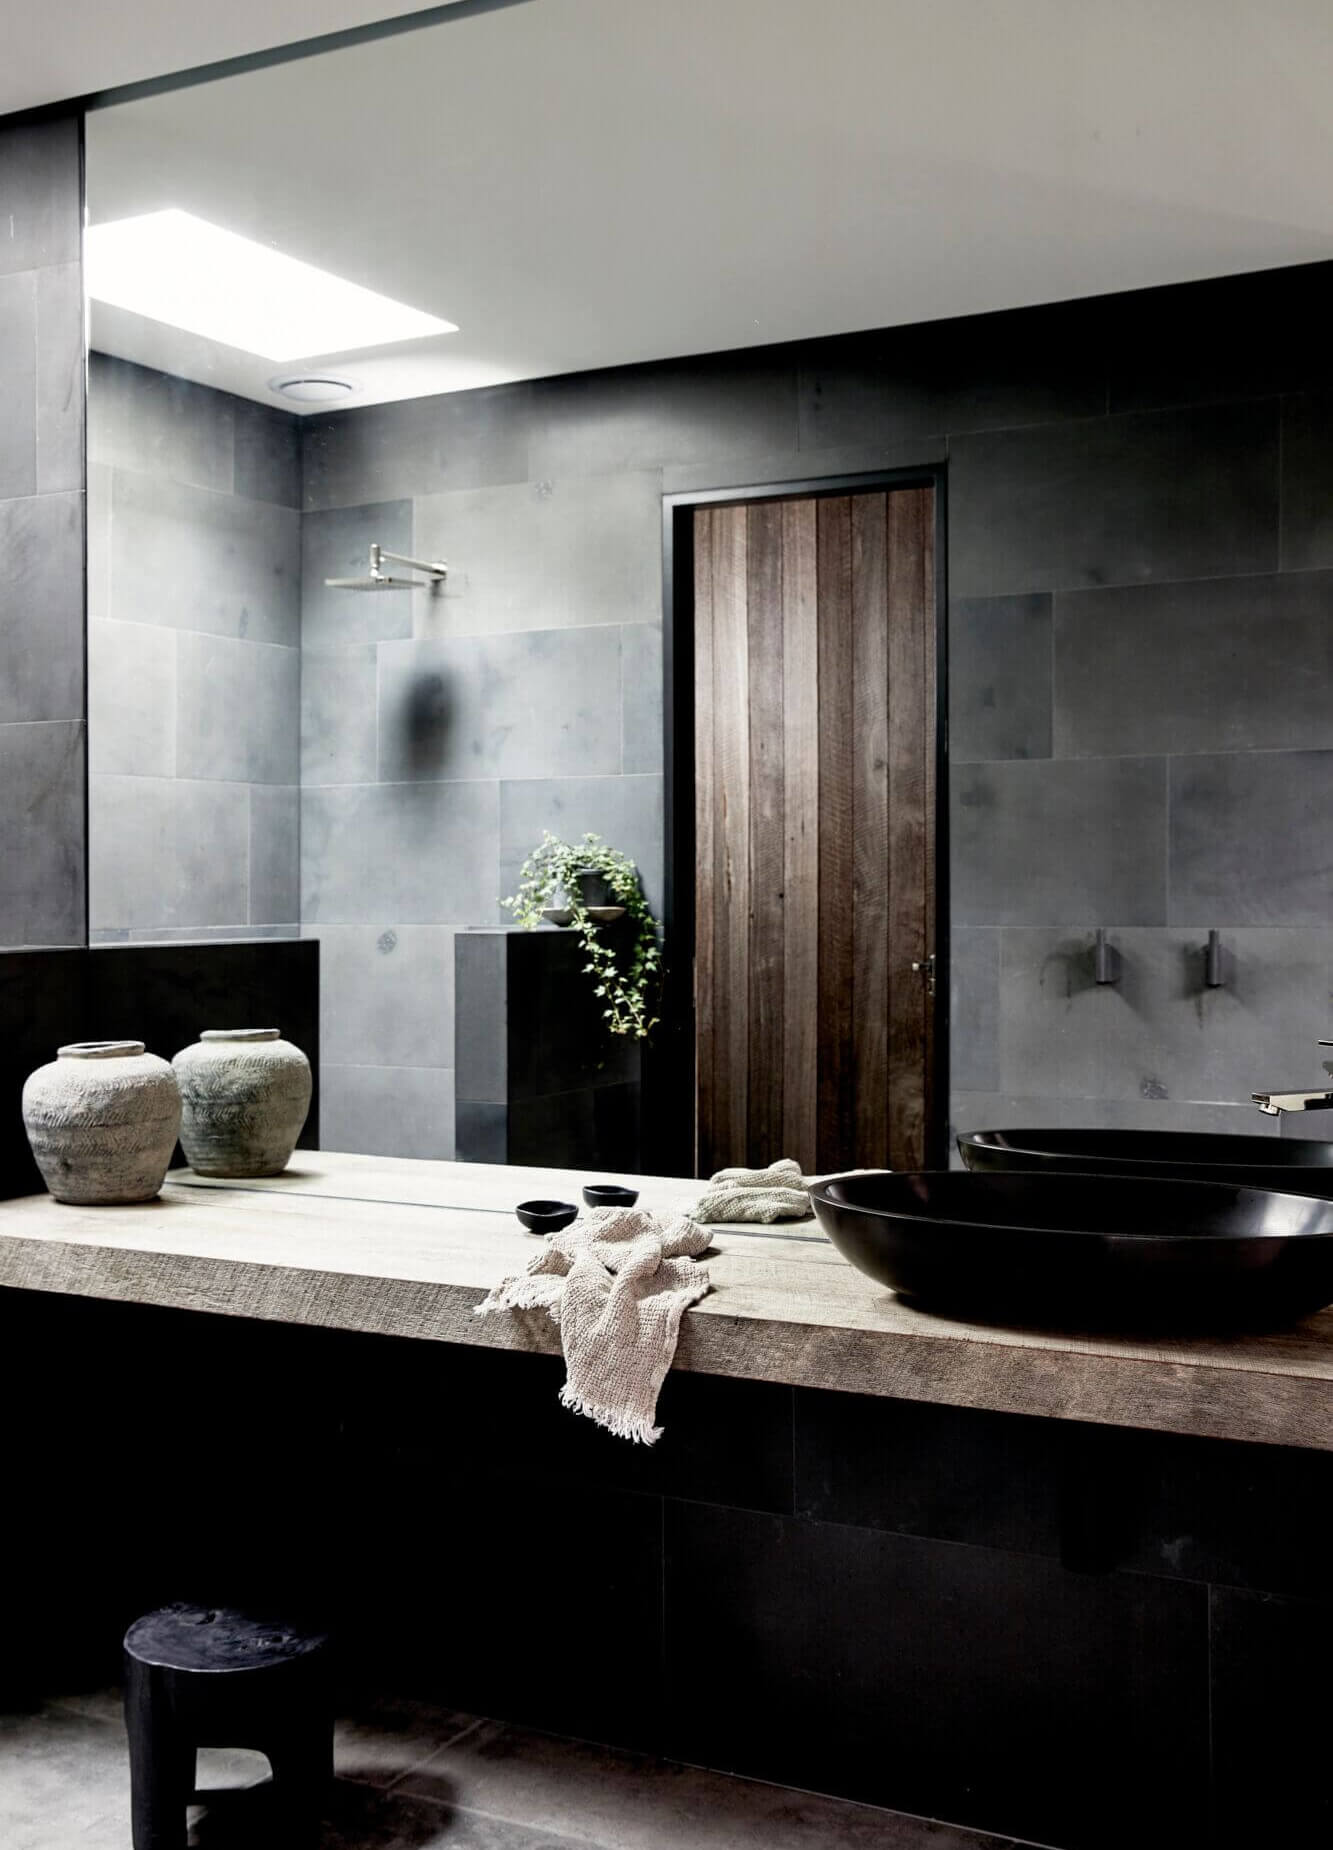 Ensuite at The Cabin, Byron Beach Abodes with dark wall tiles, double shower with skylight above, timber vanity and black feature vanity bowl